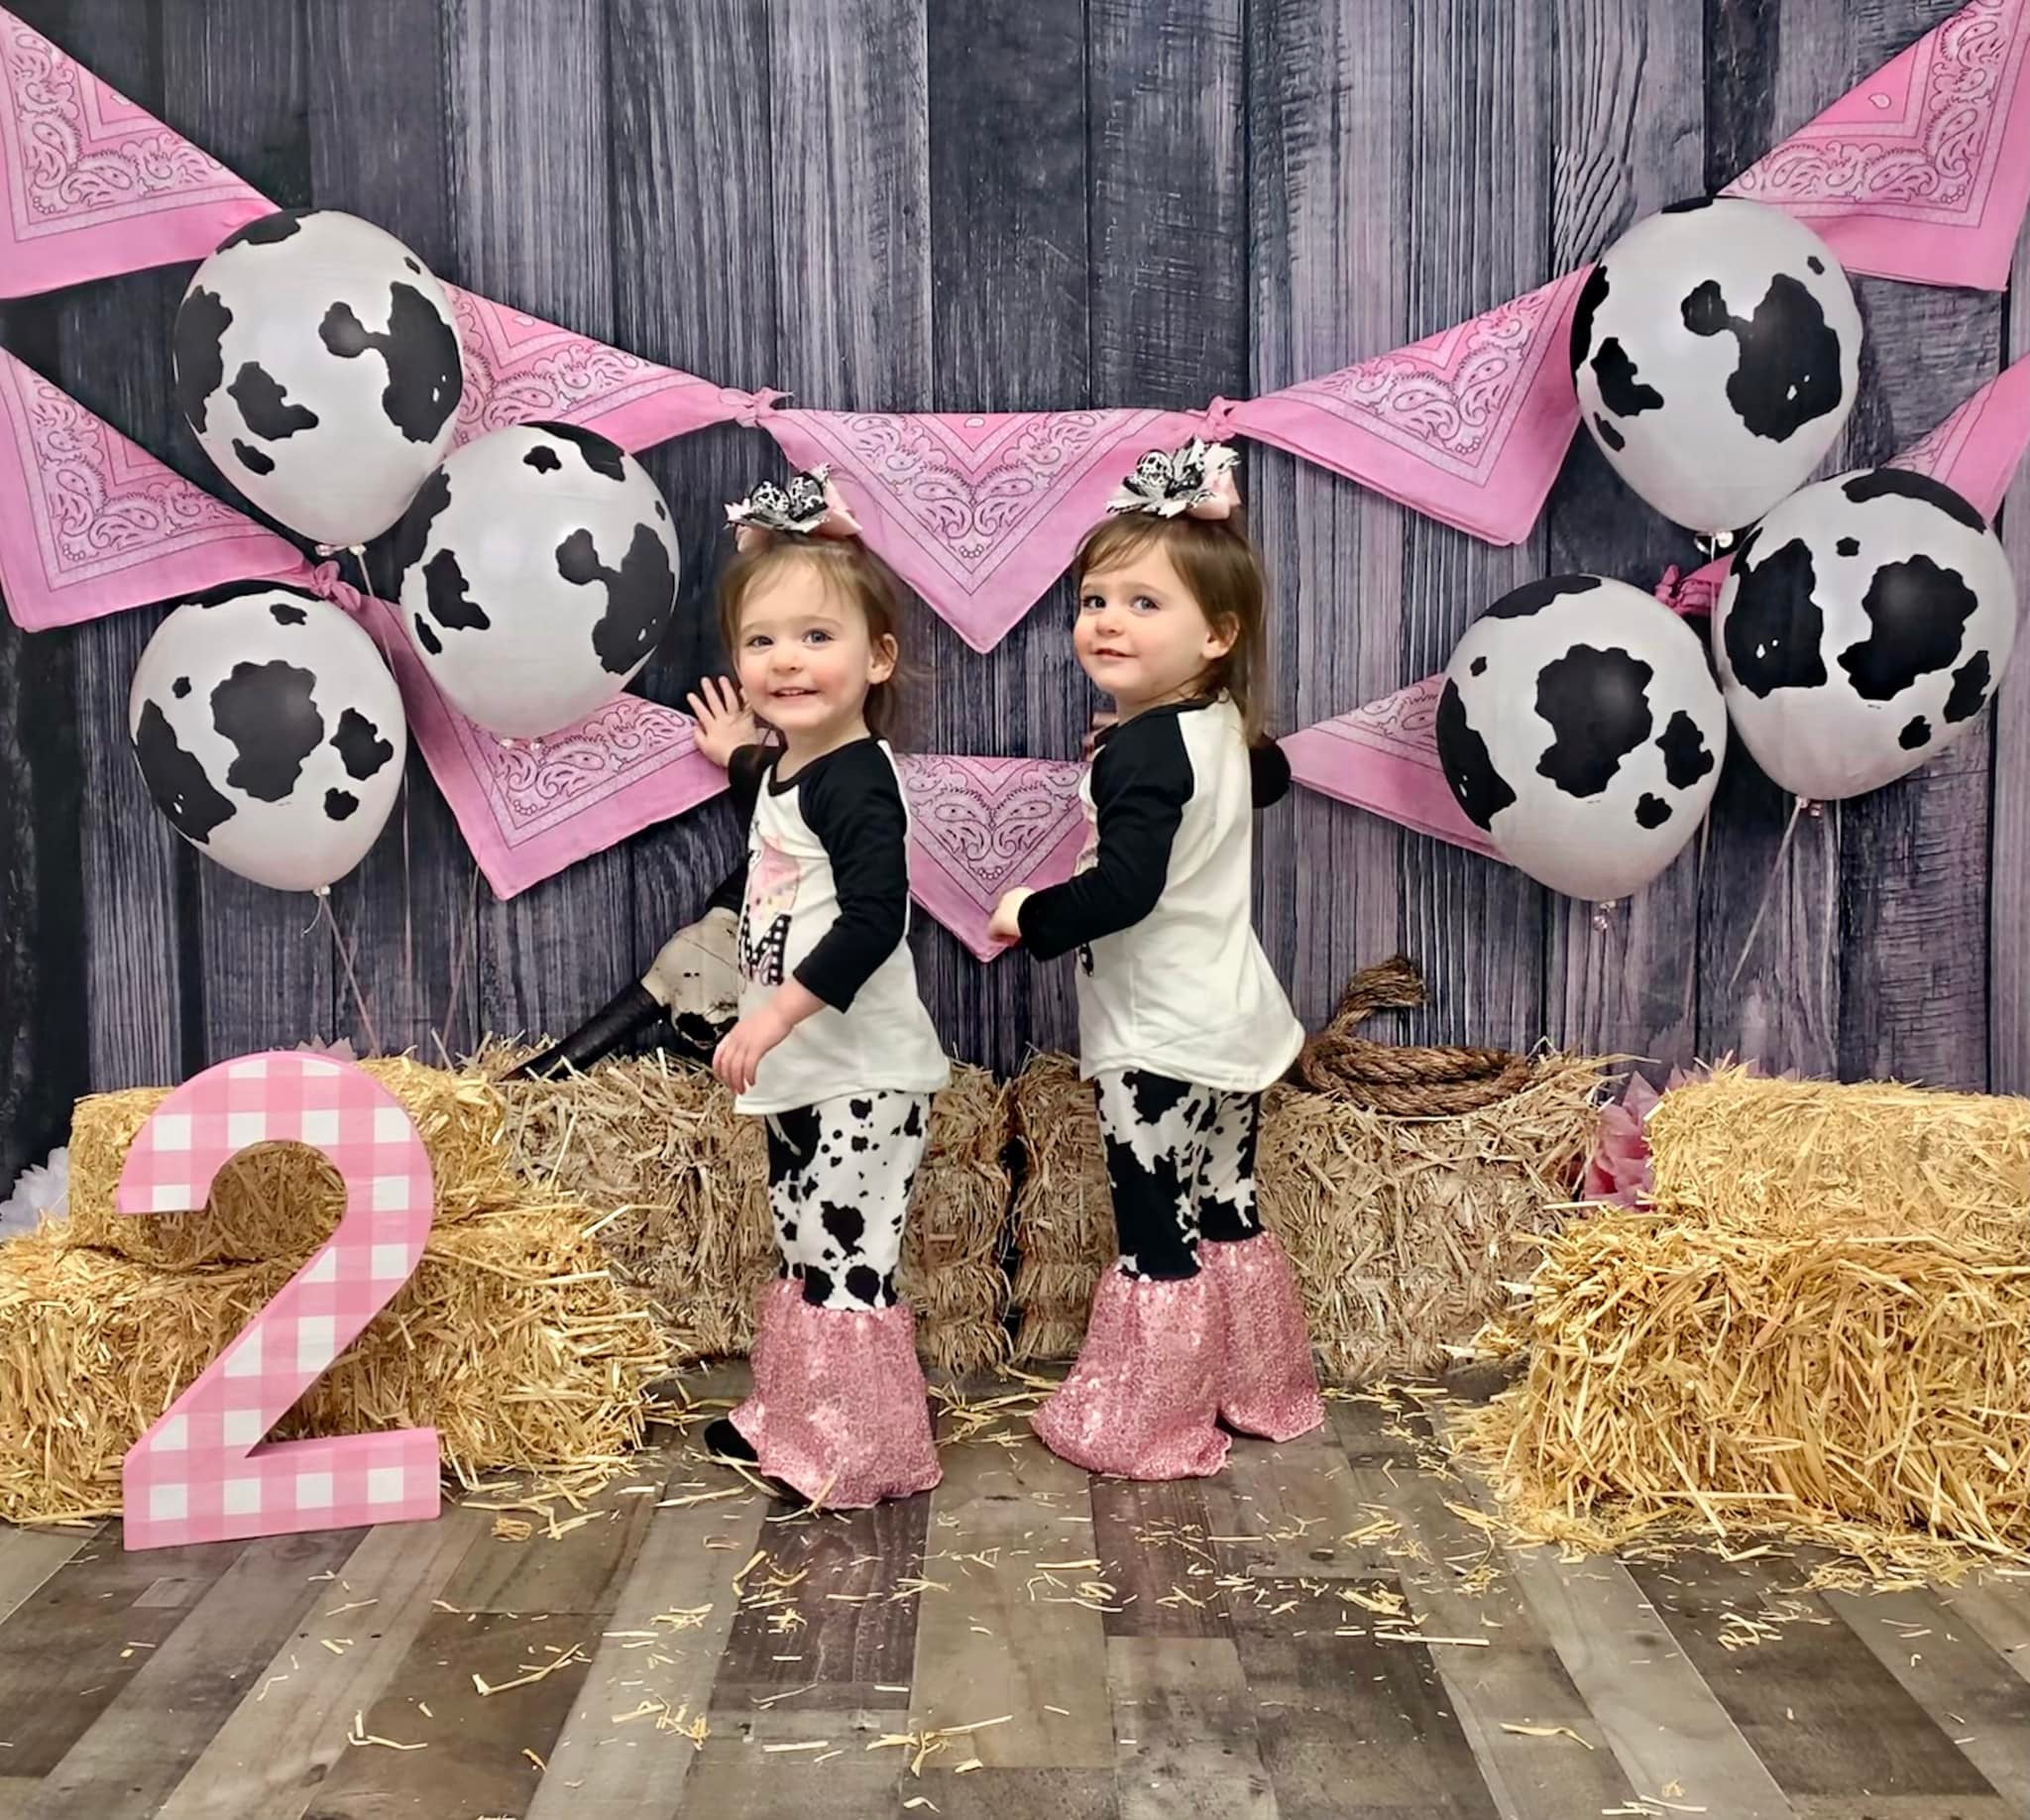 Kate Autumn Cowgirl Pink Decorations Backdrop